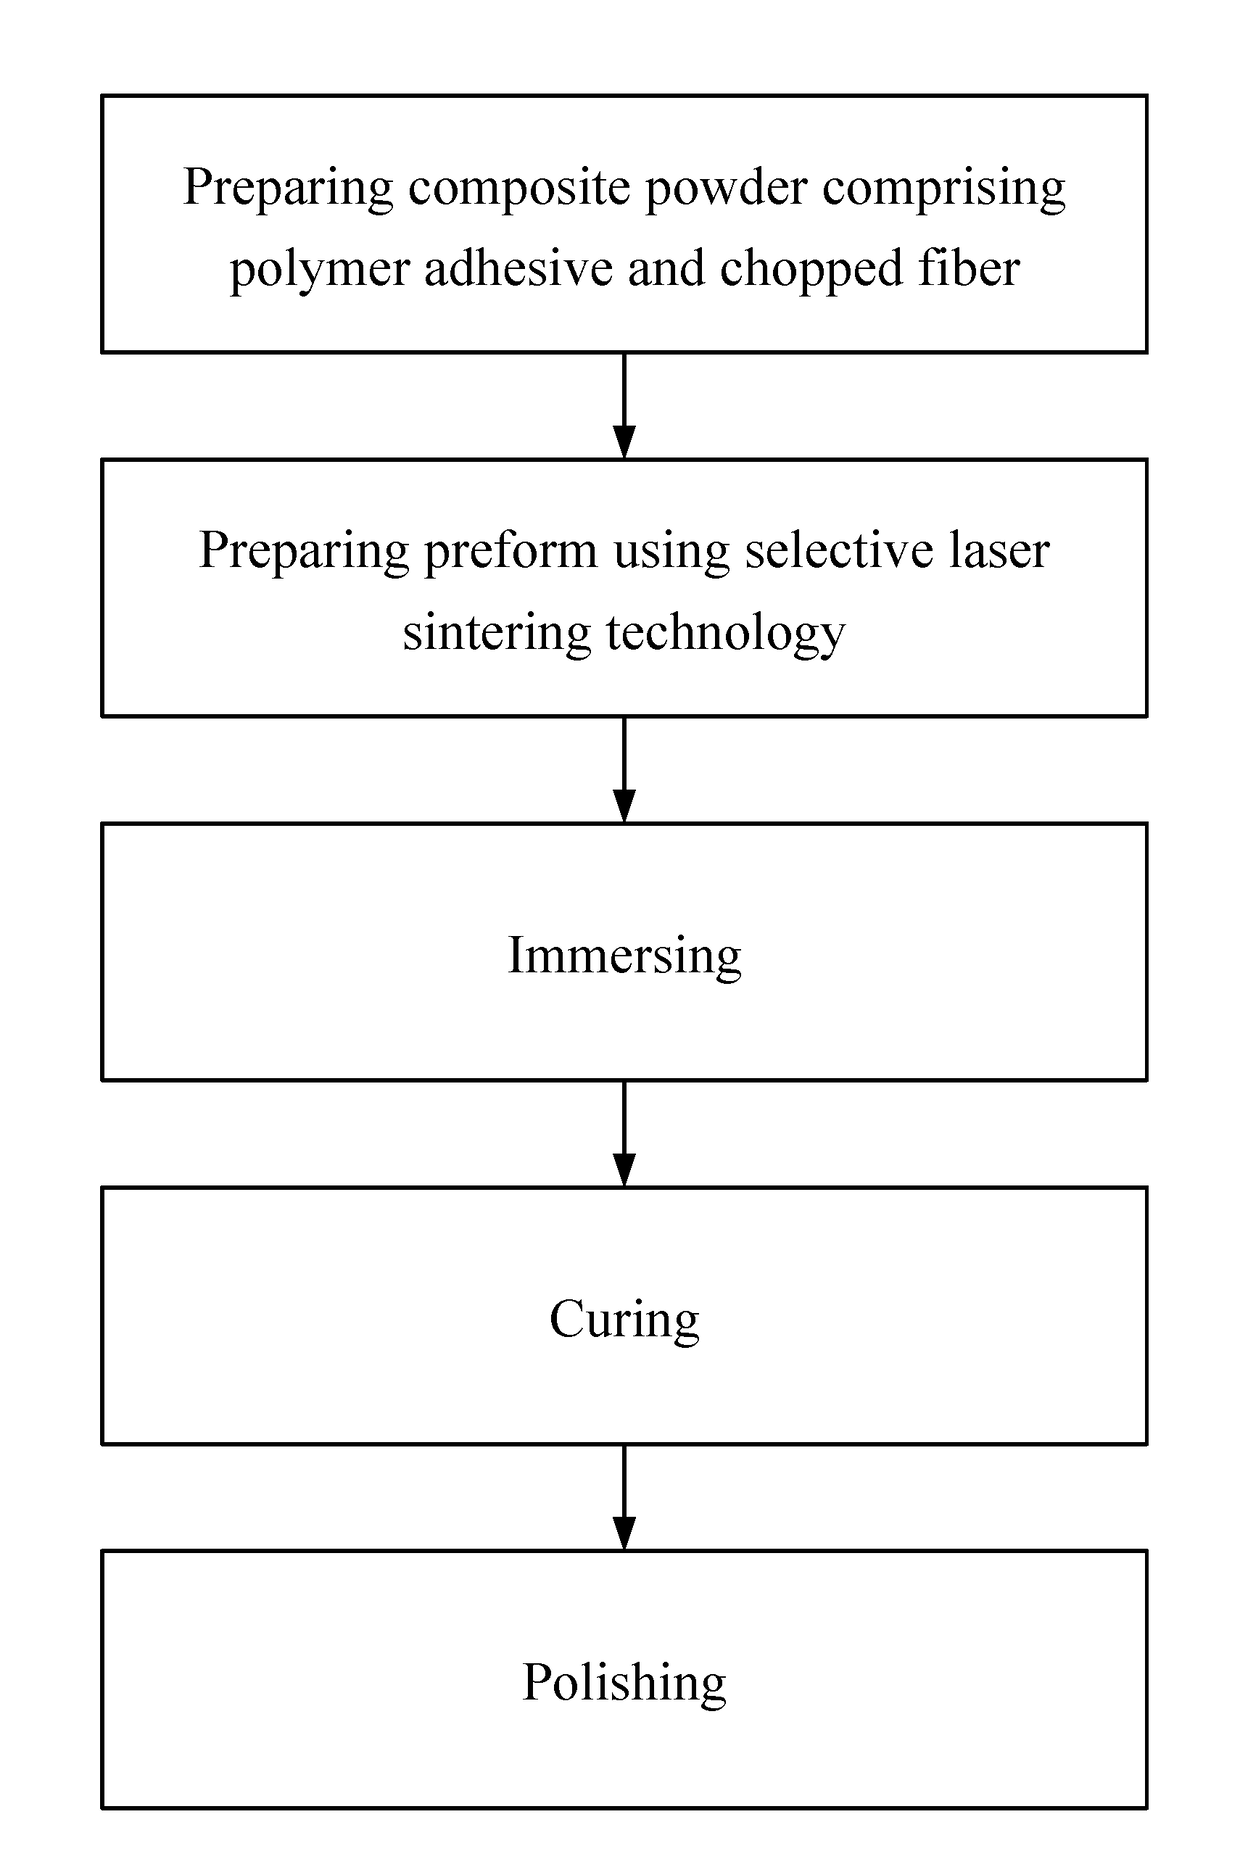 Method for manufacturing composite product from chopped fiber reinforced thermosetting resin by 3D printing